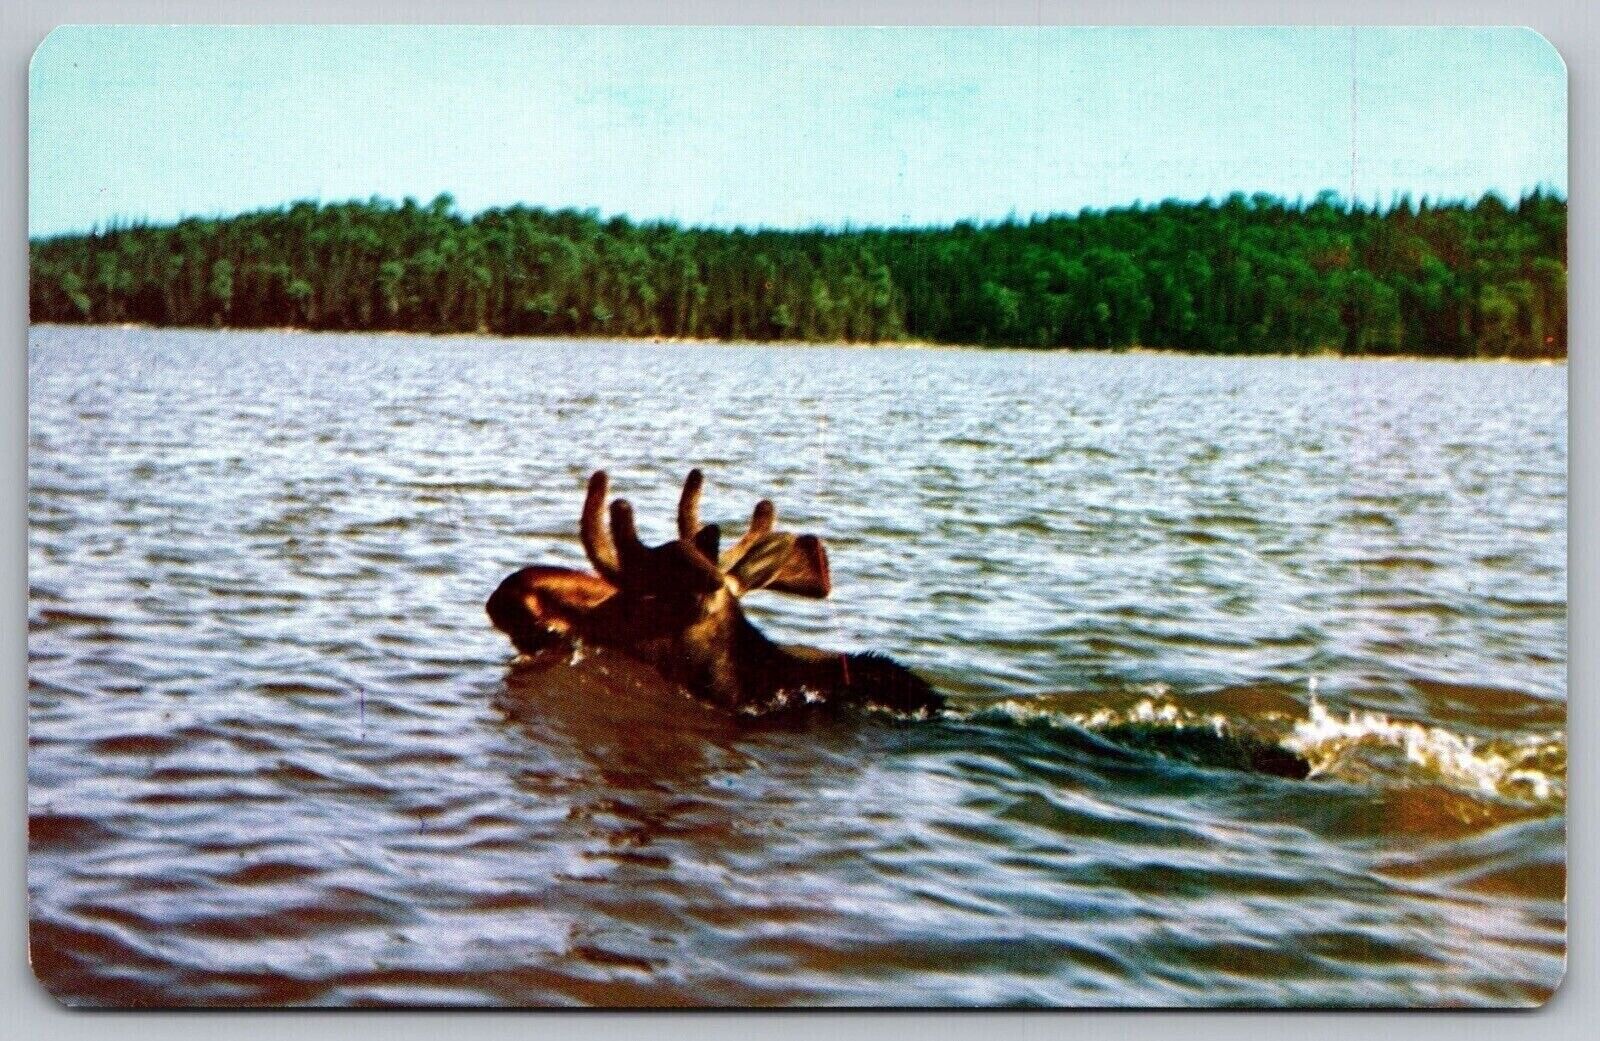 Sharbot Lake Ontario Canada Moose Scenic Northern Landscape Chrome Postcard